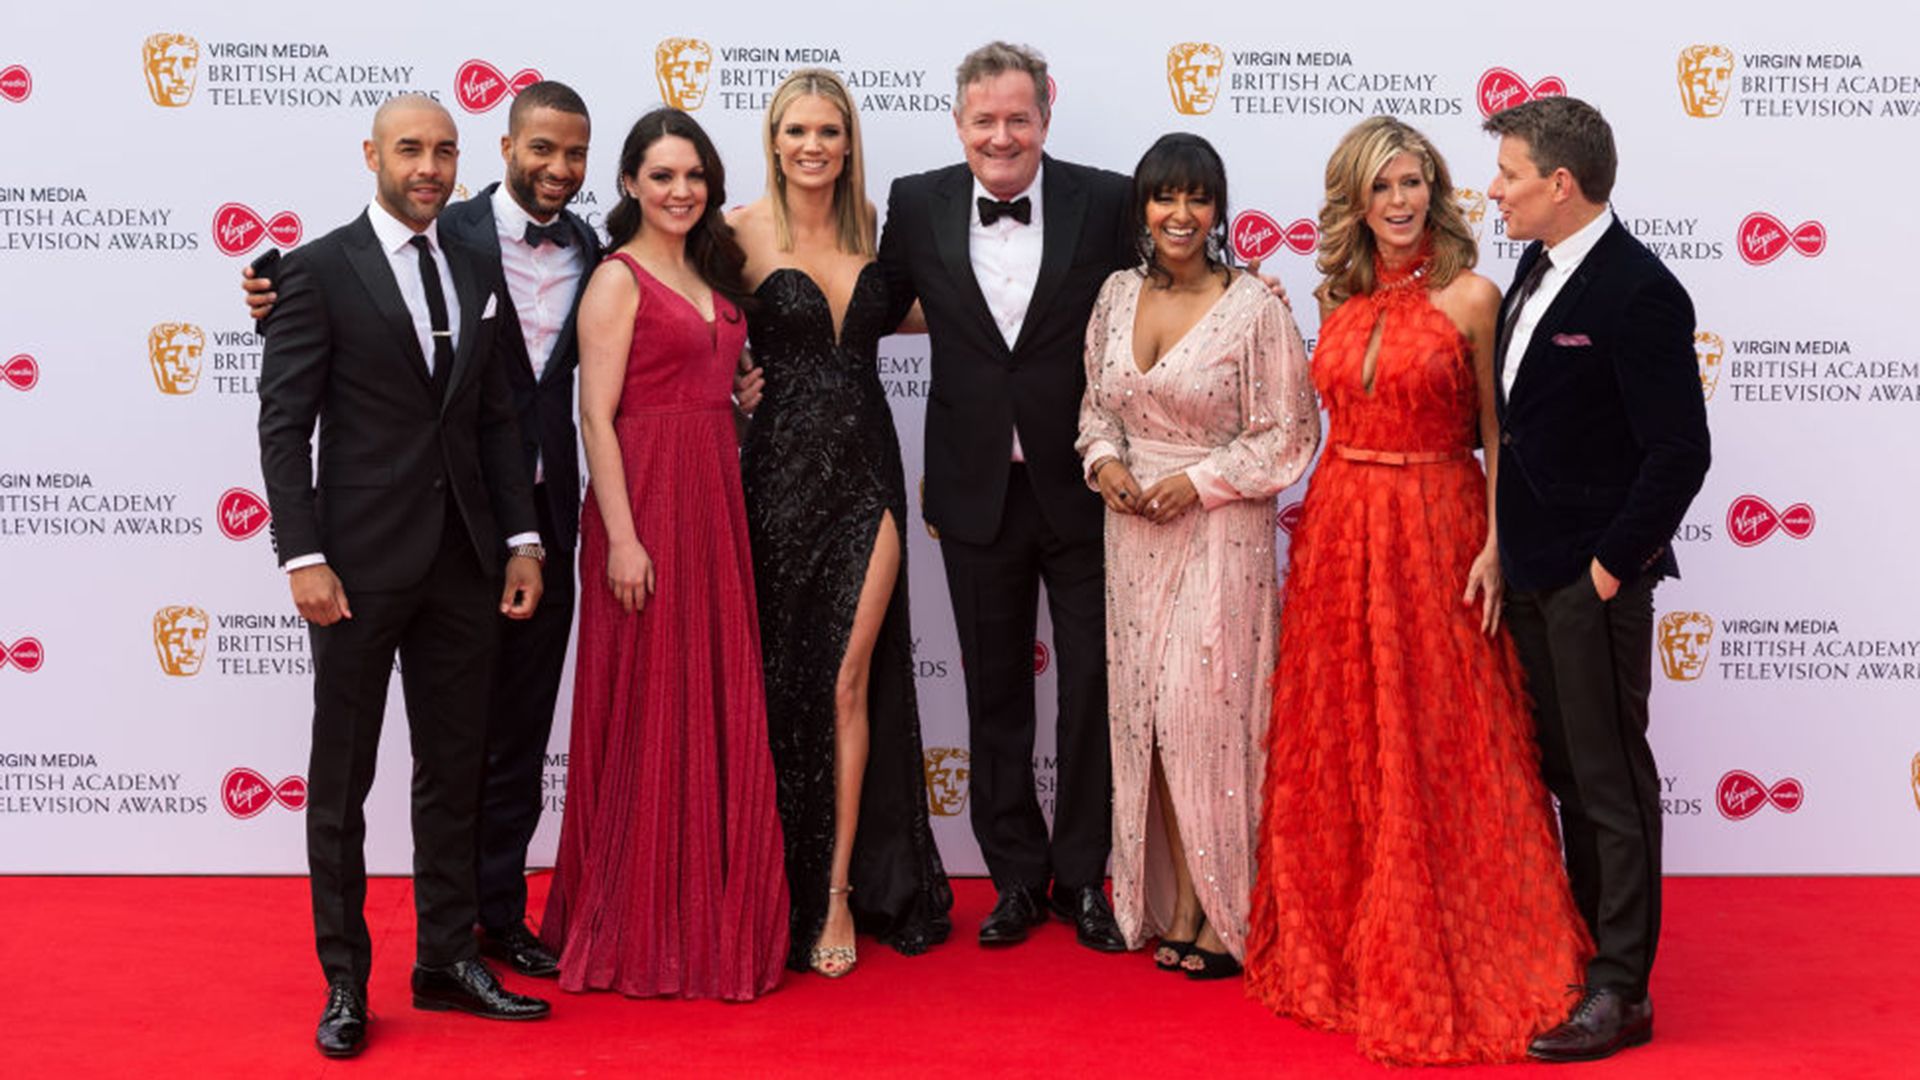 Piers Morgan (C) and cast of Good Morning Britain attend the Virgin Media British Academy Television Awards ceremony at the Royal Festival Hall on 12 May, 2019